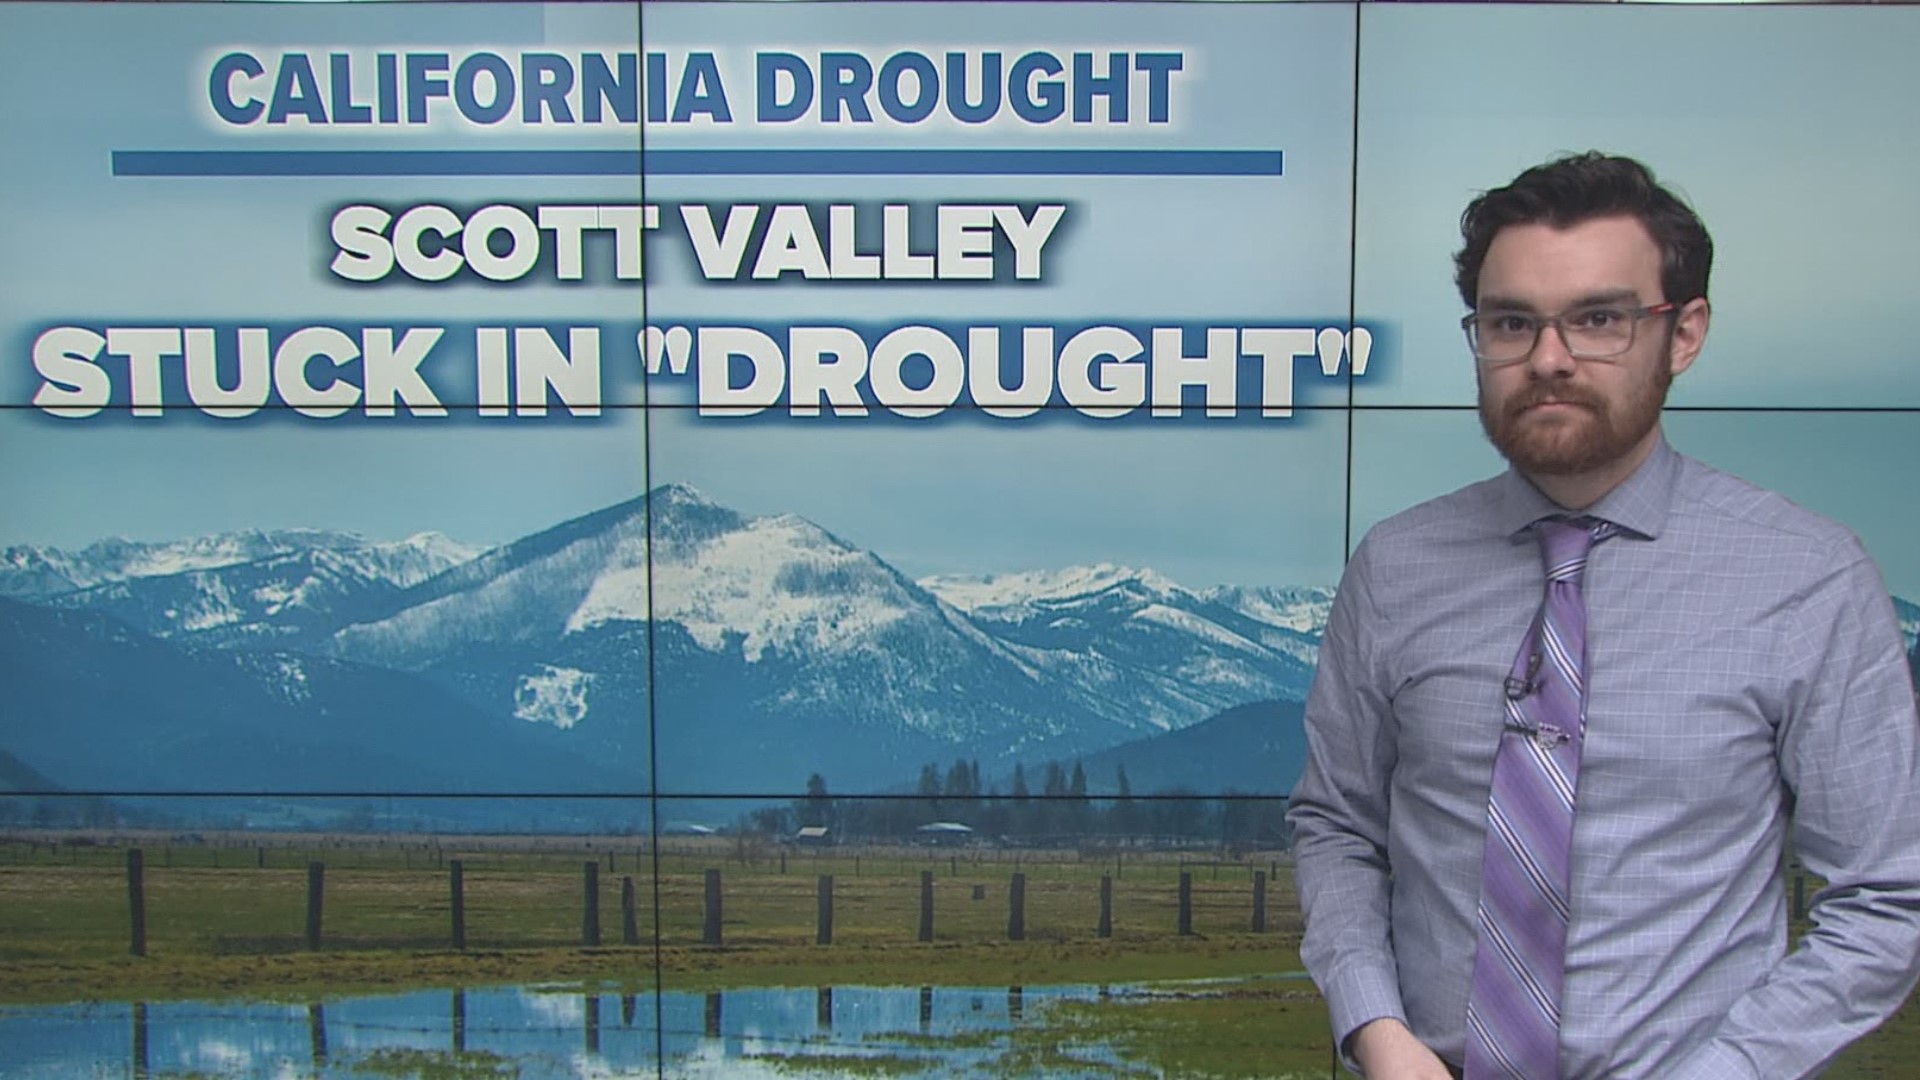 Scott Valley is stuck in drought despite improving conditions. They are asking the state to lift the emergency regulations.